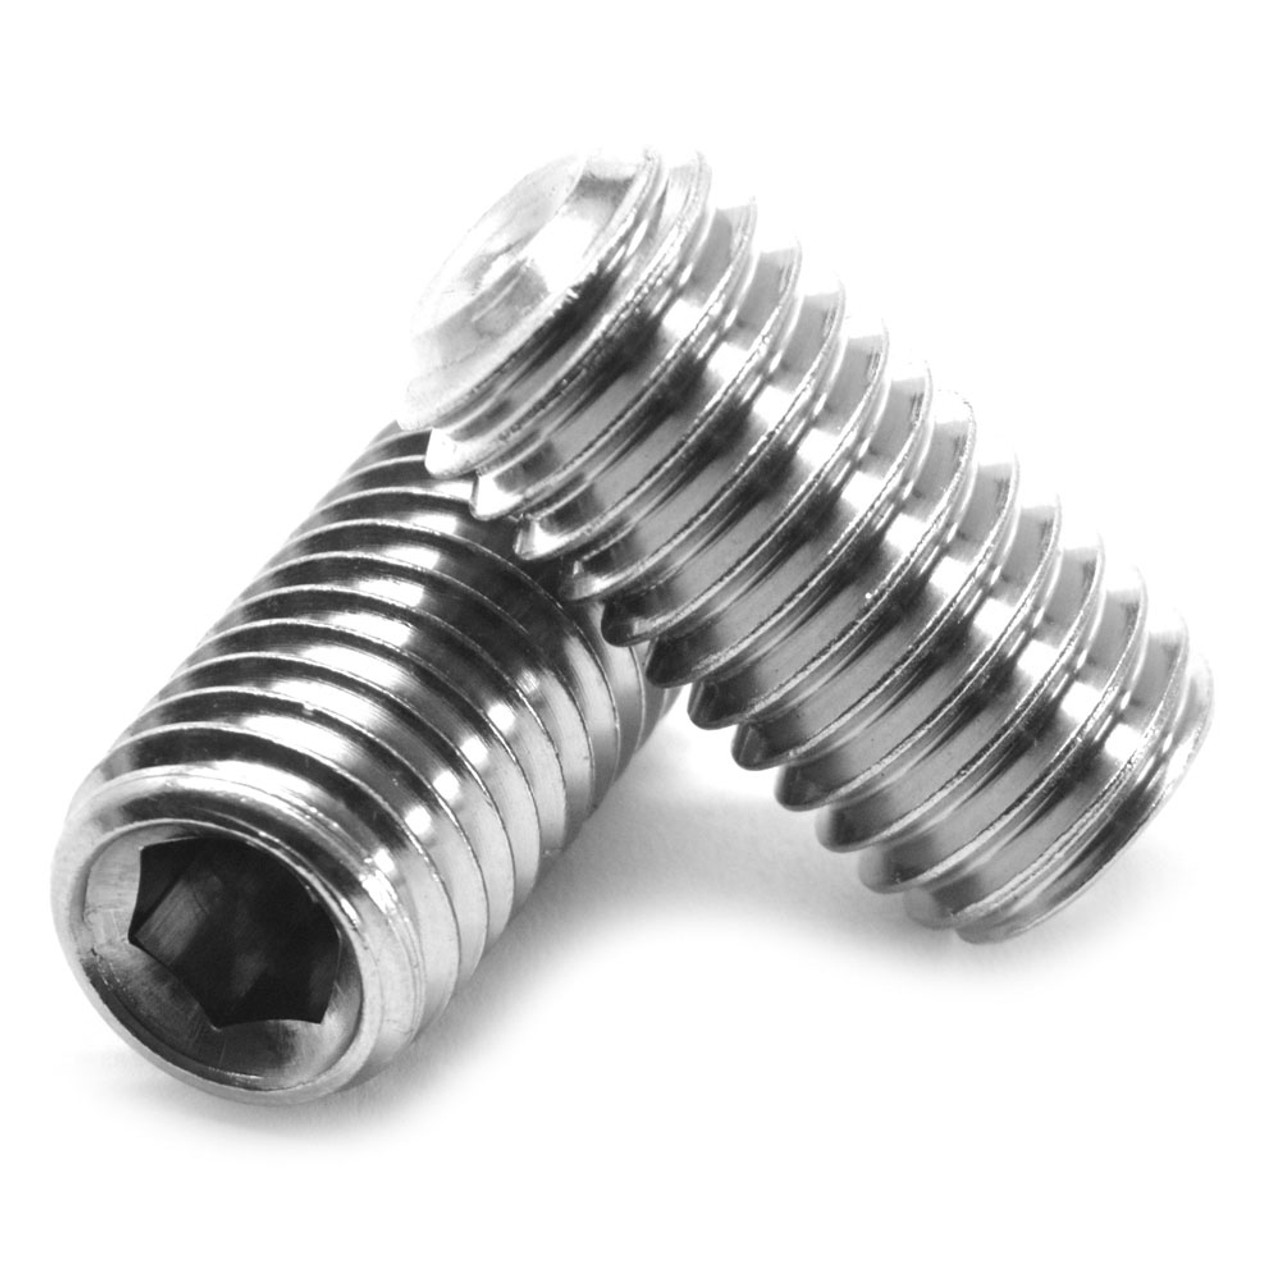 M3 x 0.50 x 3 MM Coarse Thread DIN 916 / ISO 4029 Socket Set Screw Cup Point Stainless Steel 316